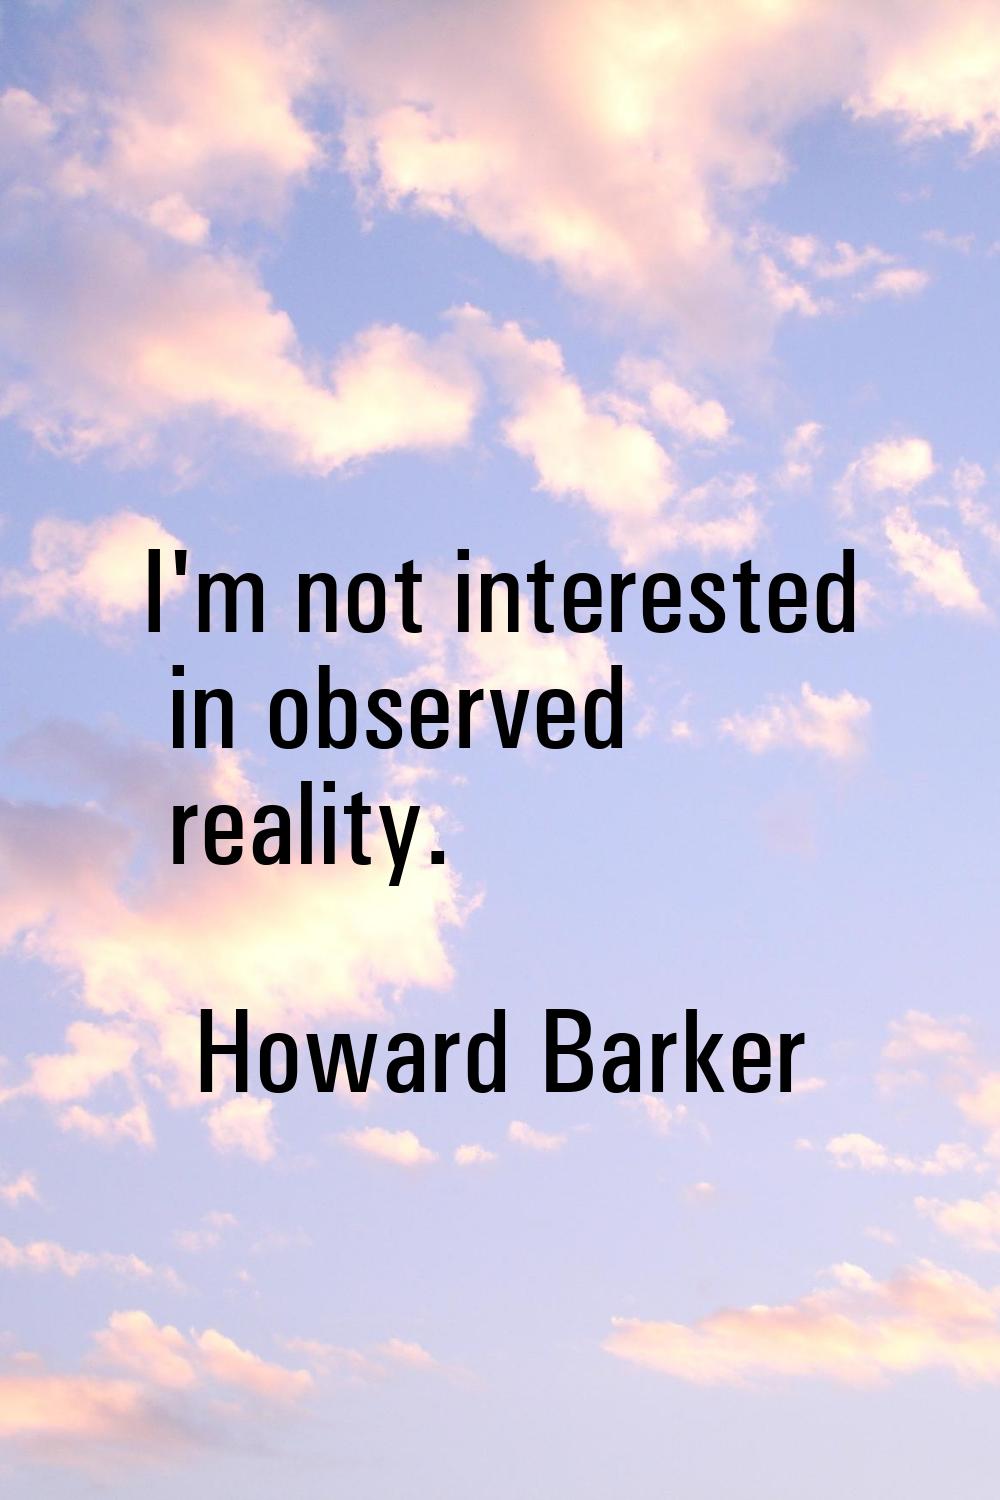 I'm not interested in observed reality.